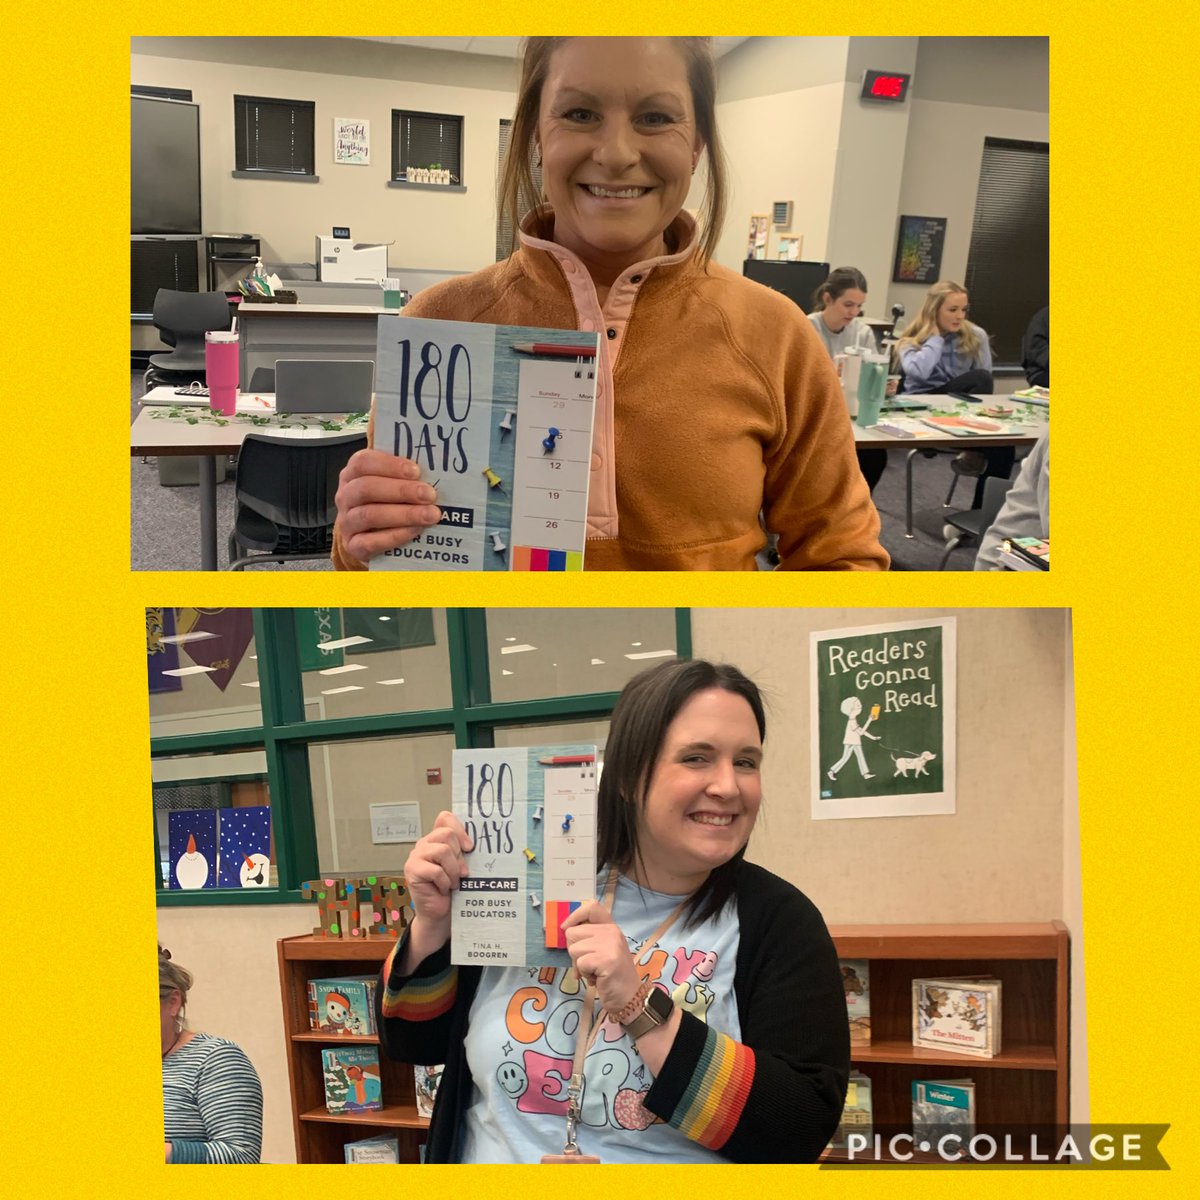 Welcome back MISD teachers! Congrats to the winners of book with tips for self care. In order to give your best , you must feel your best! #teacherwellness  #mymisd ⁦@THBoogren⁩